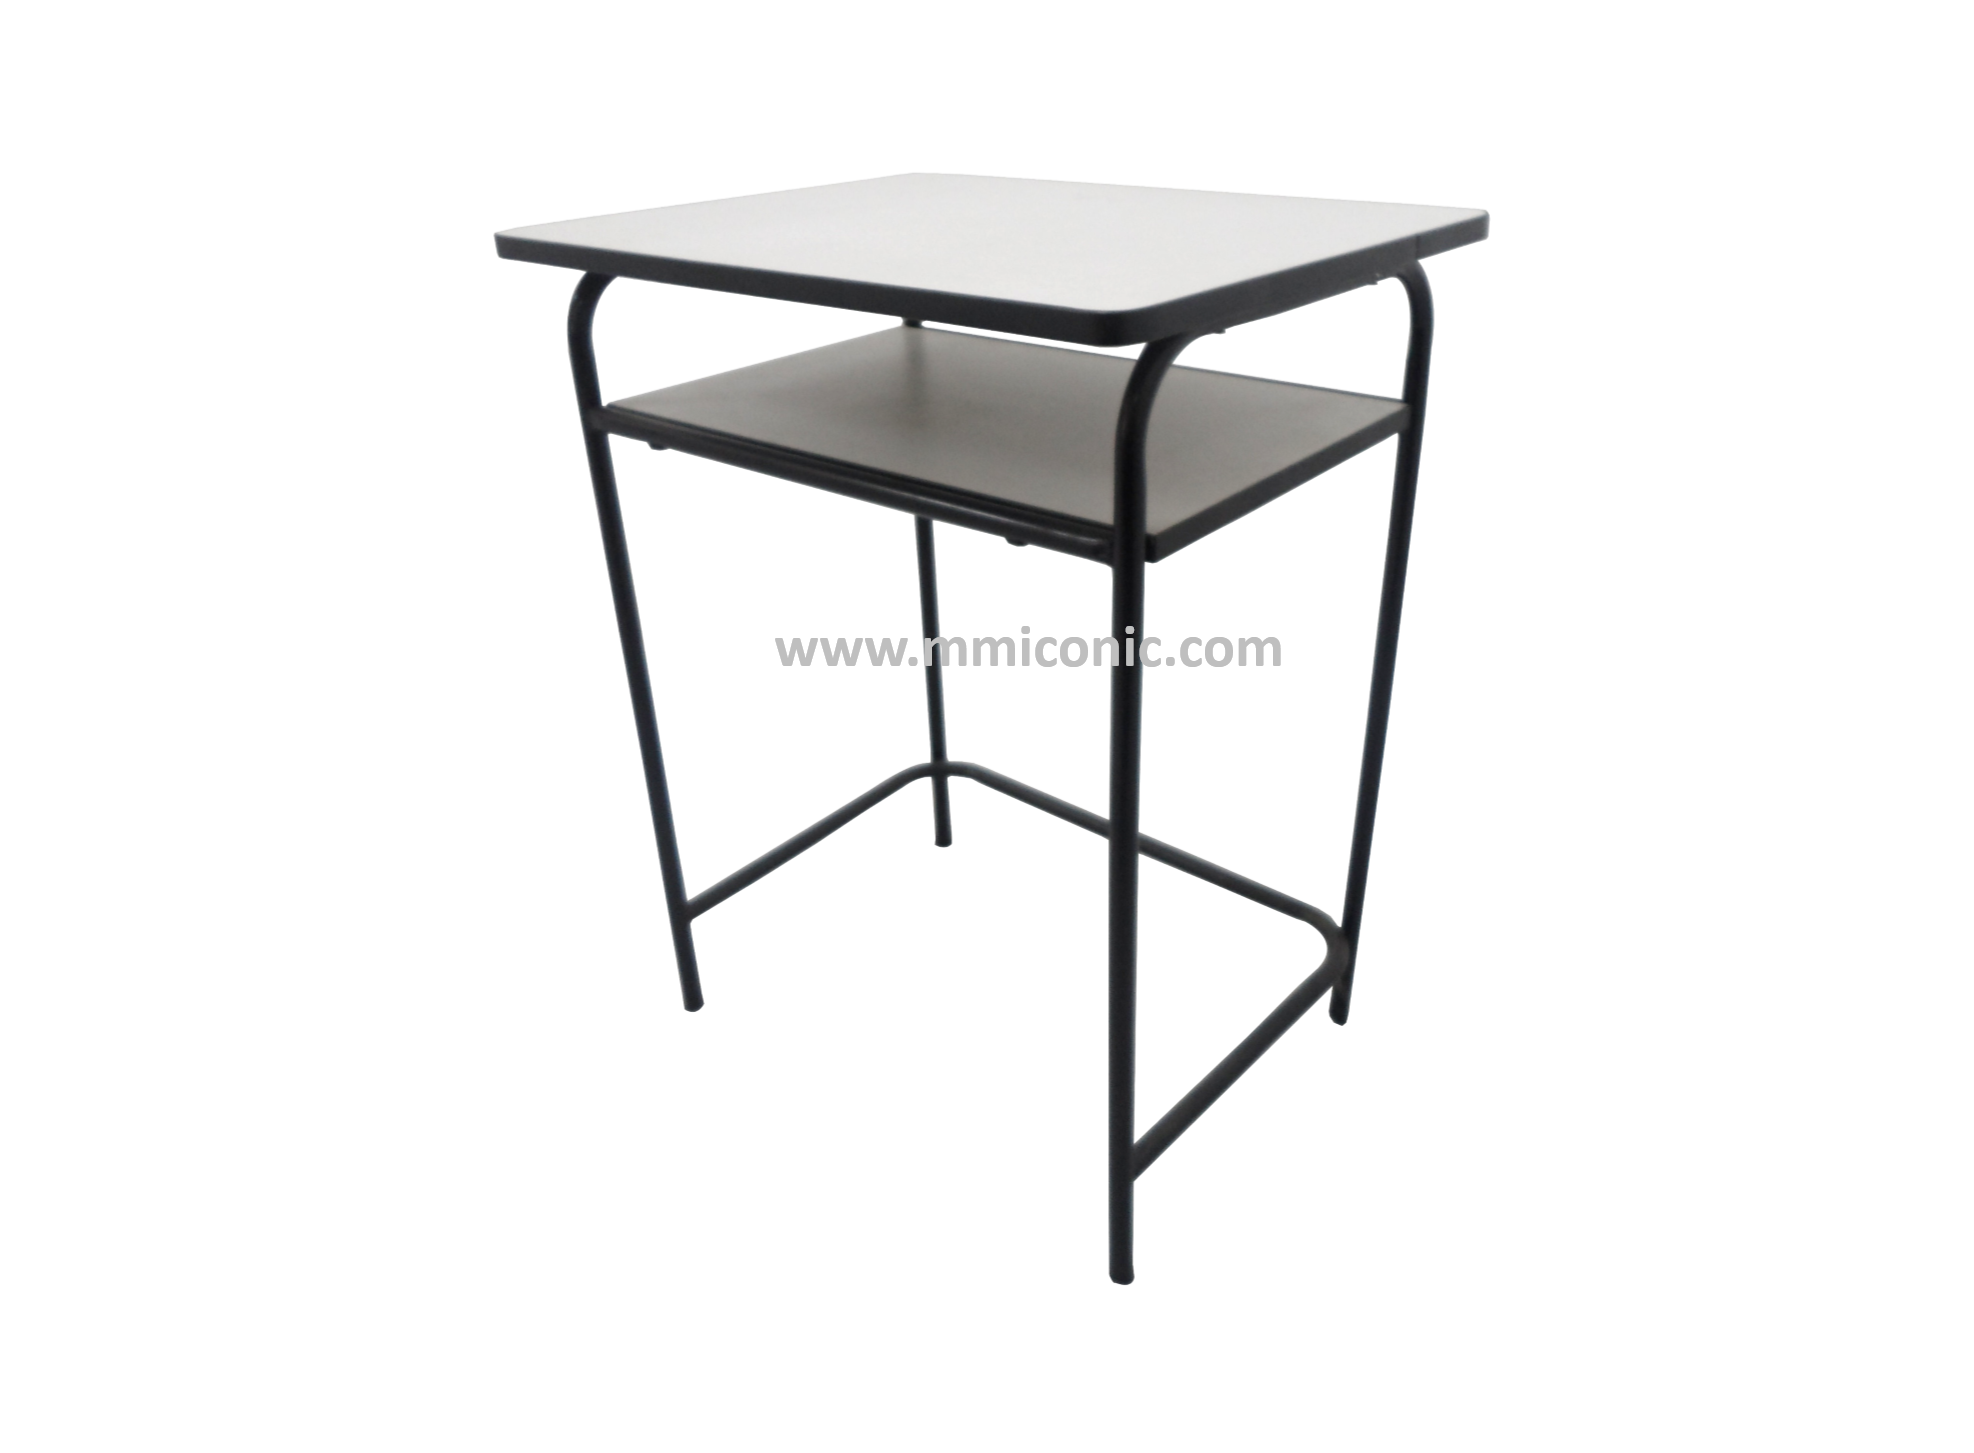 ETB-S7 – MM ICONIC Education Furniture Manufacturer Malaysia